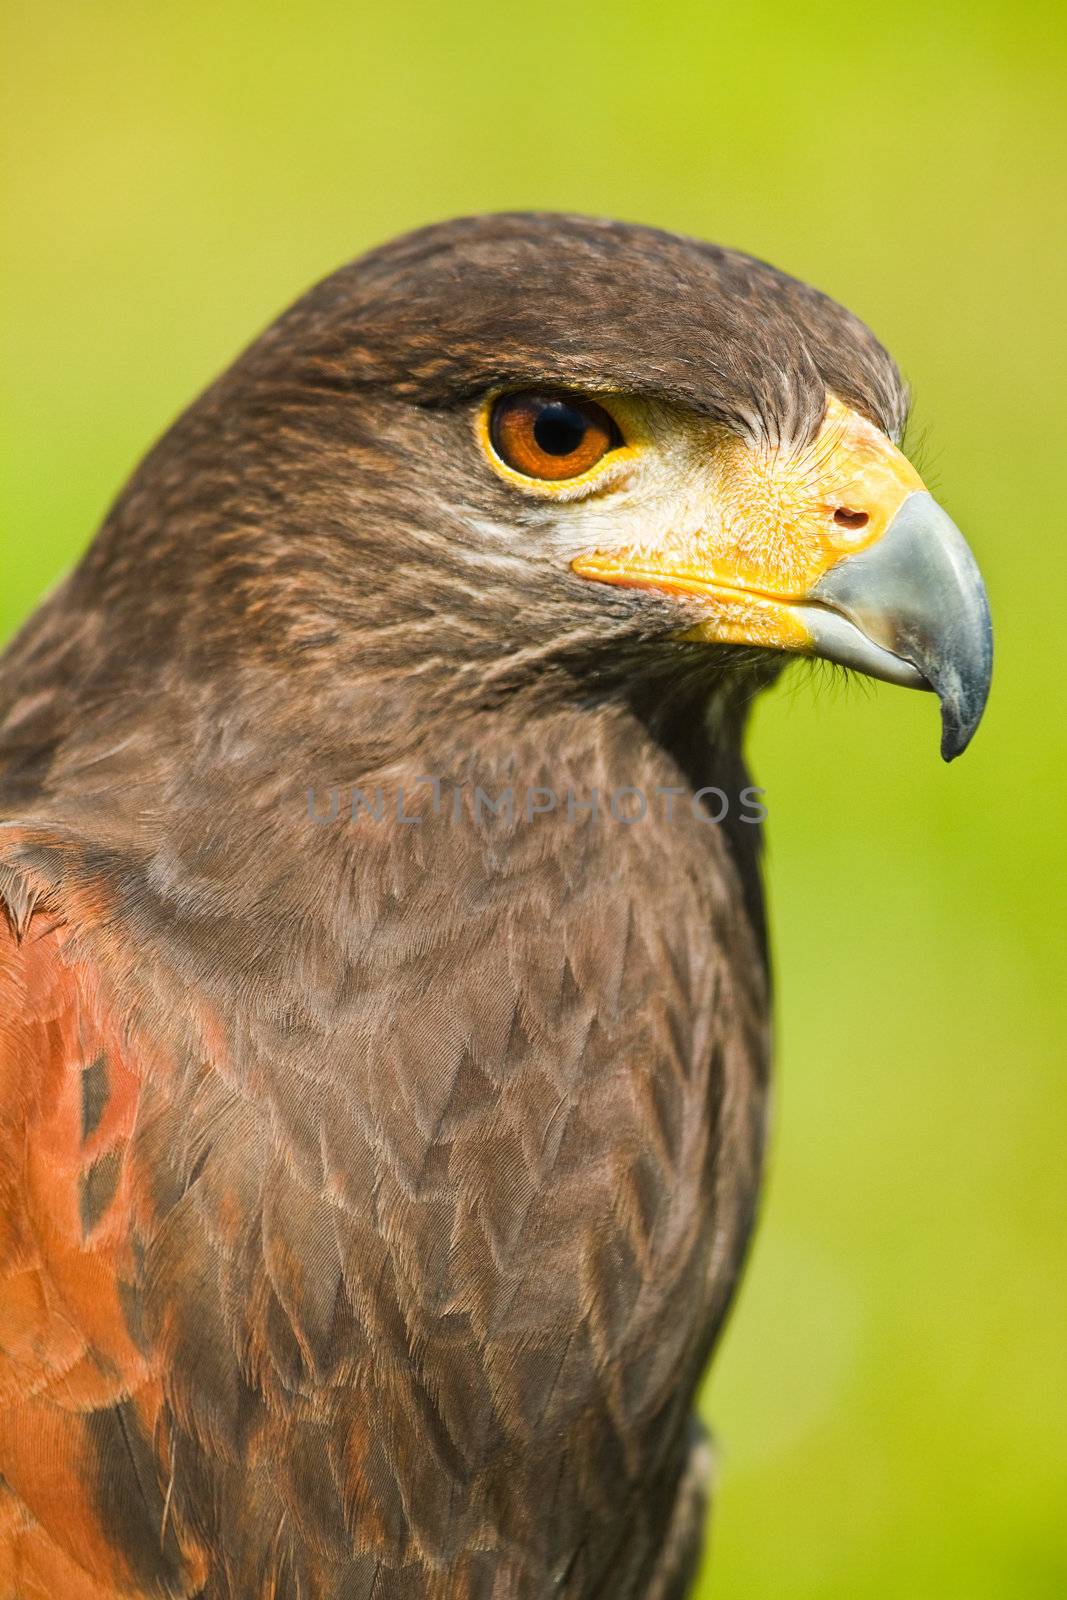 Head of Harris Hawk or Parabuteo unicinctus in side angle view - also called Dusty- or Baywinged hawk